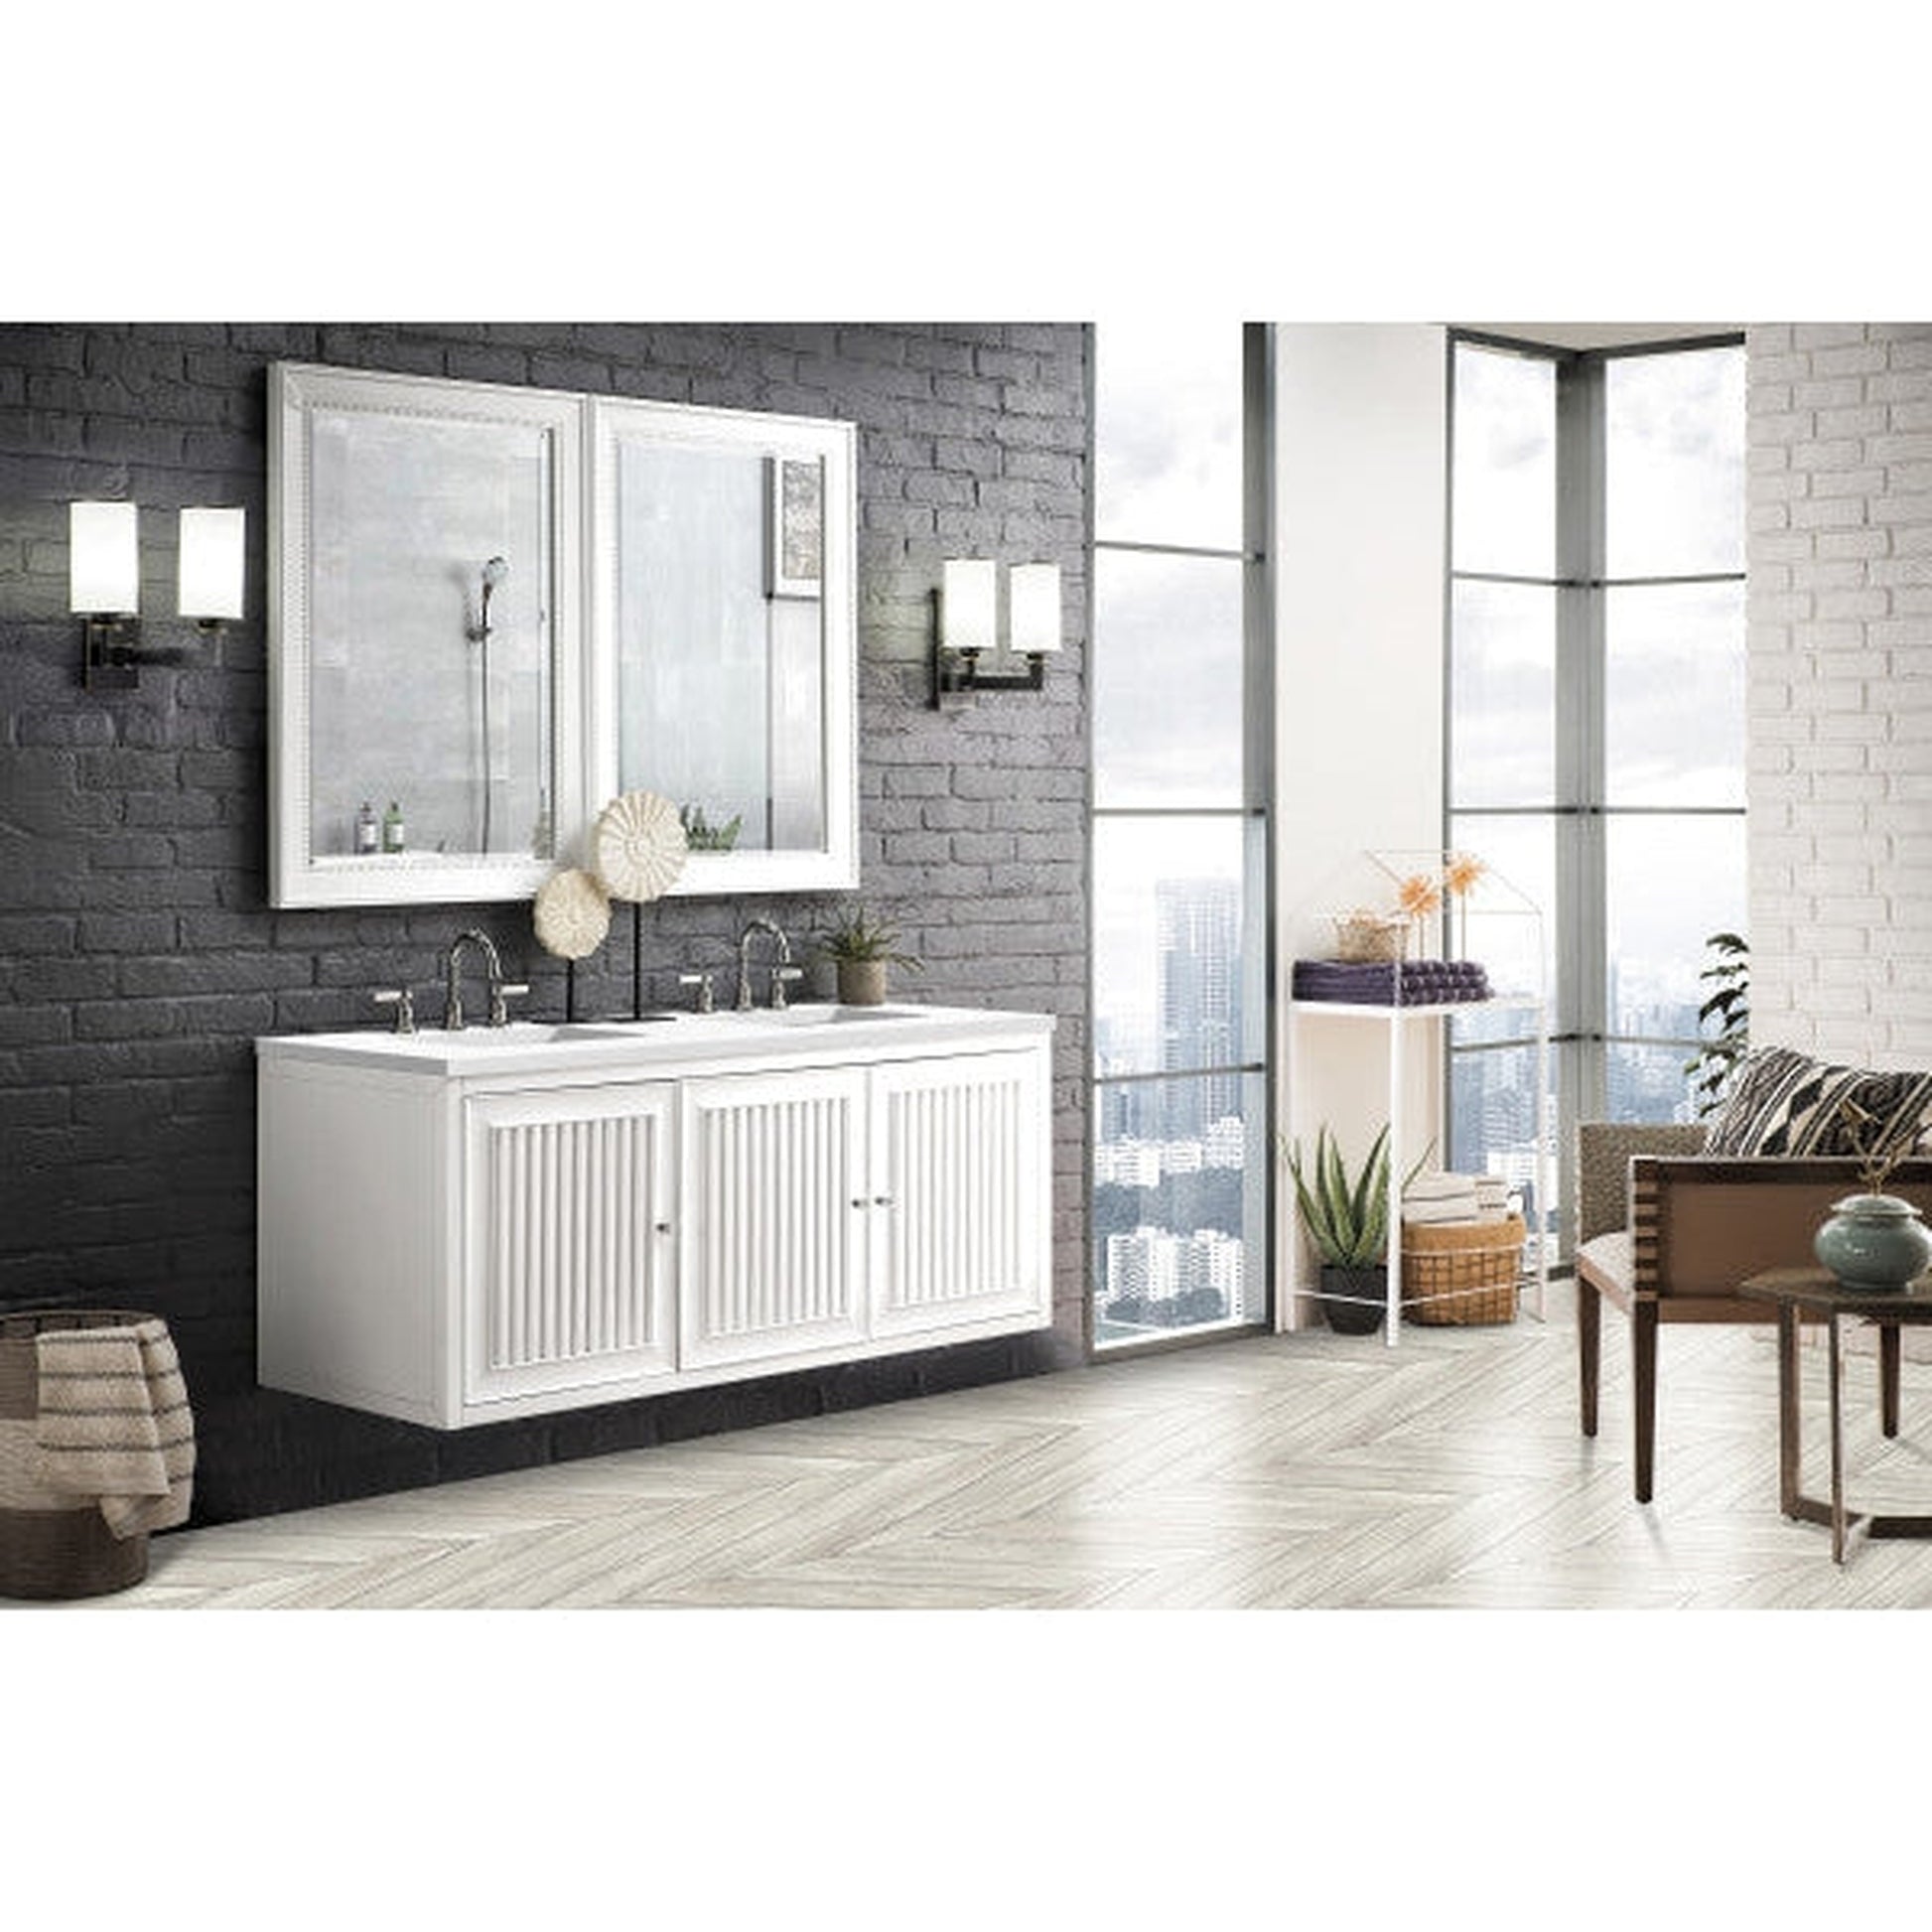 James Martin Athens 60" Double Glossy White Bathroom Vanity With 1" Classic White Quartz Top and Rectangular Ceramic Sink